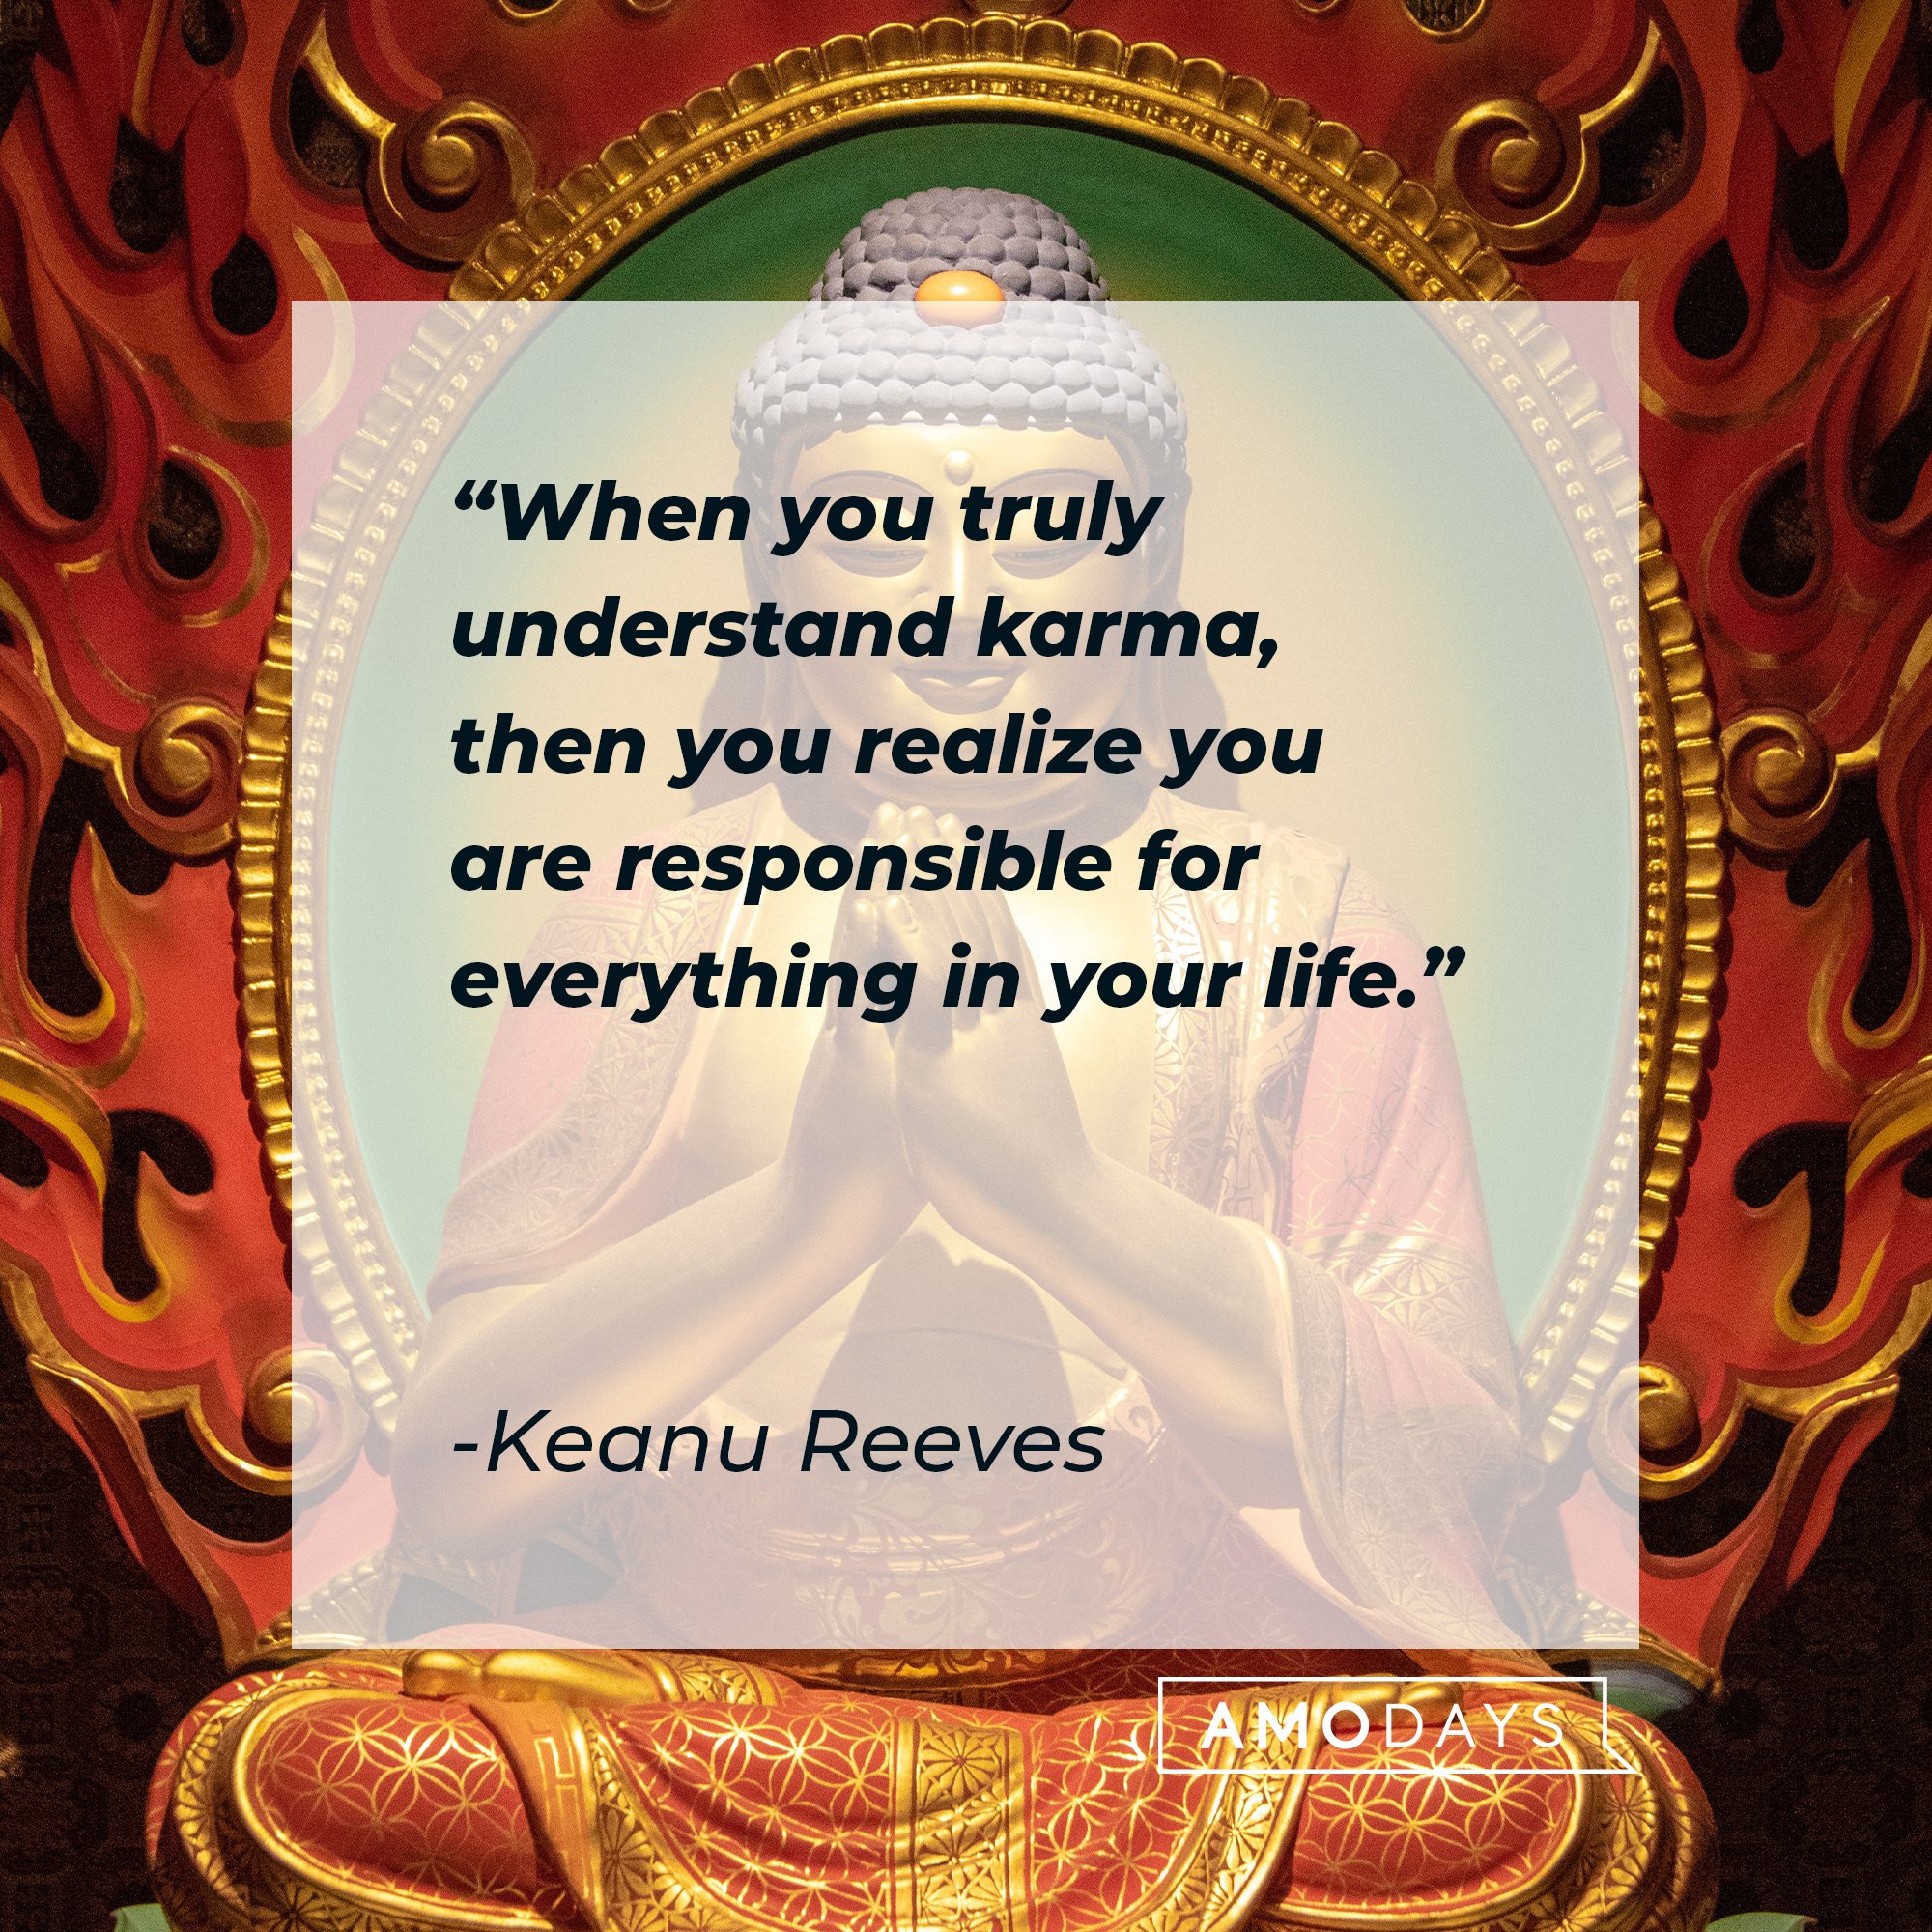 Keanu Reeves' quote: “When you truly understand karma, then you realize you are responsible for everything in your life.” | Image: AmoDays